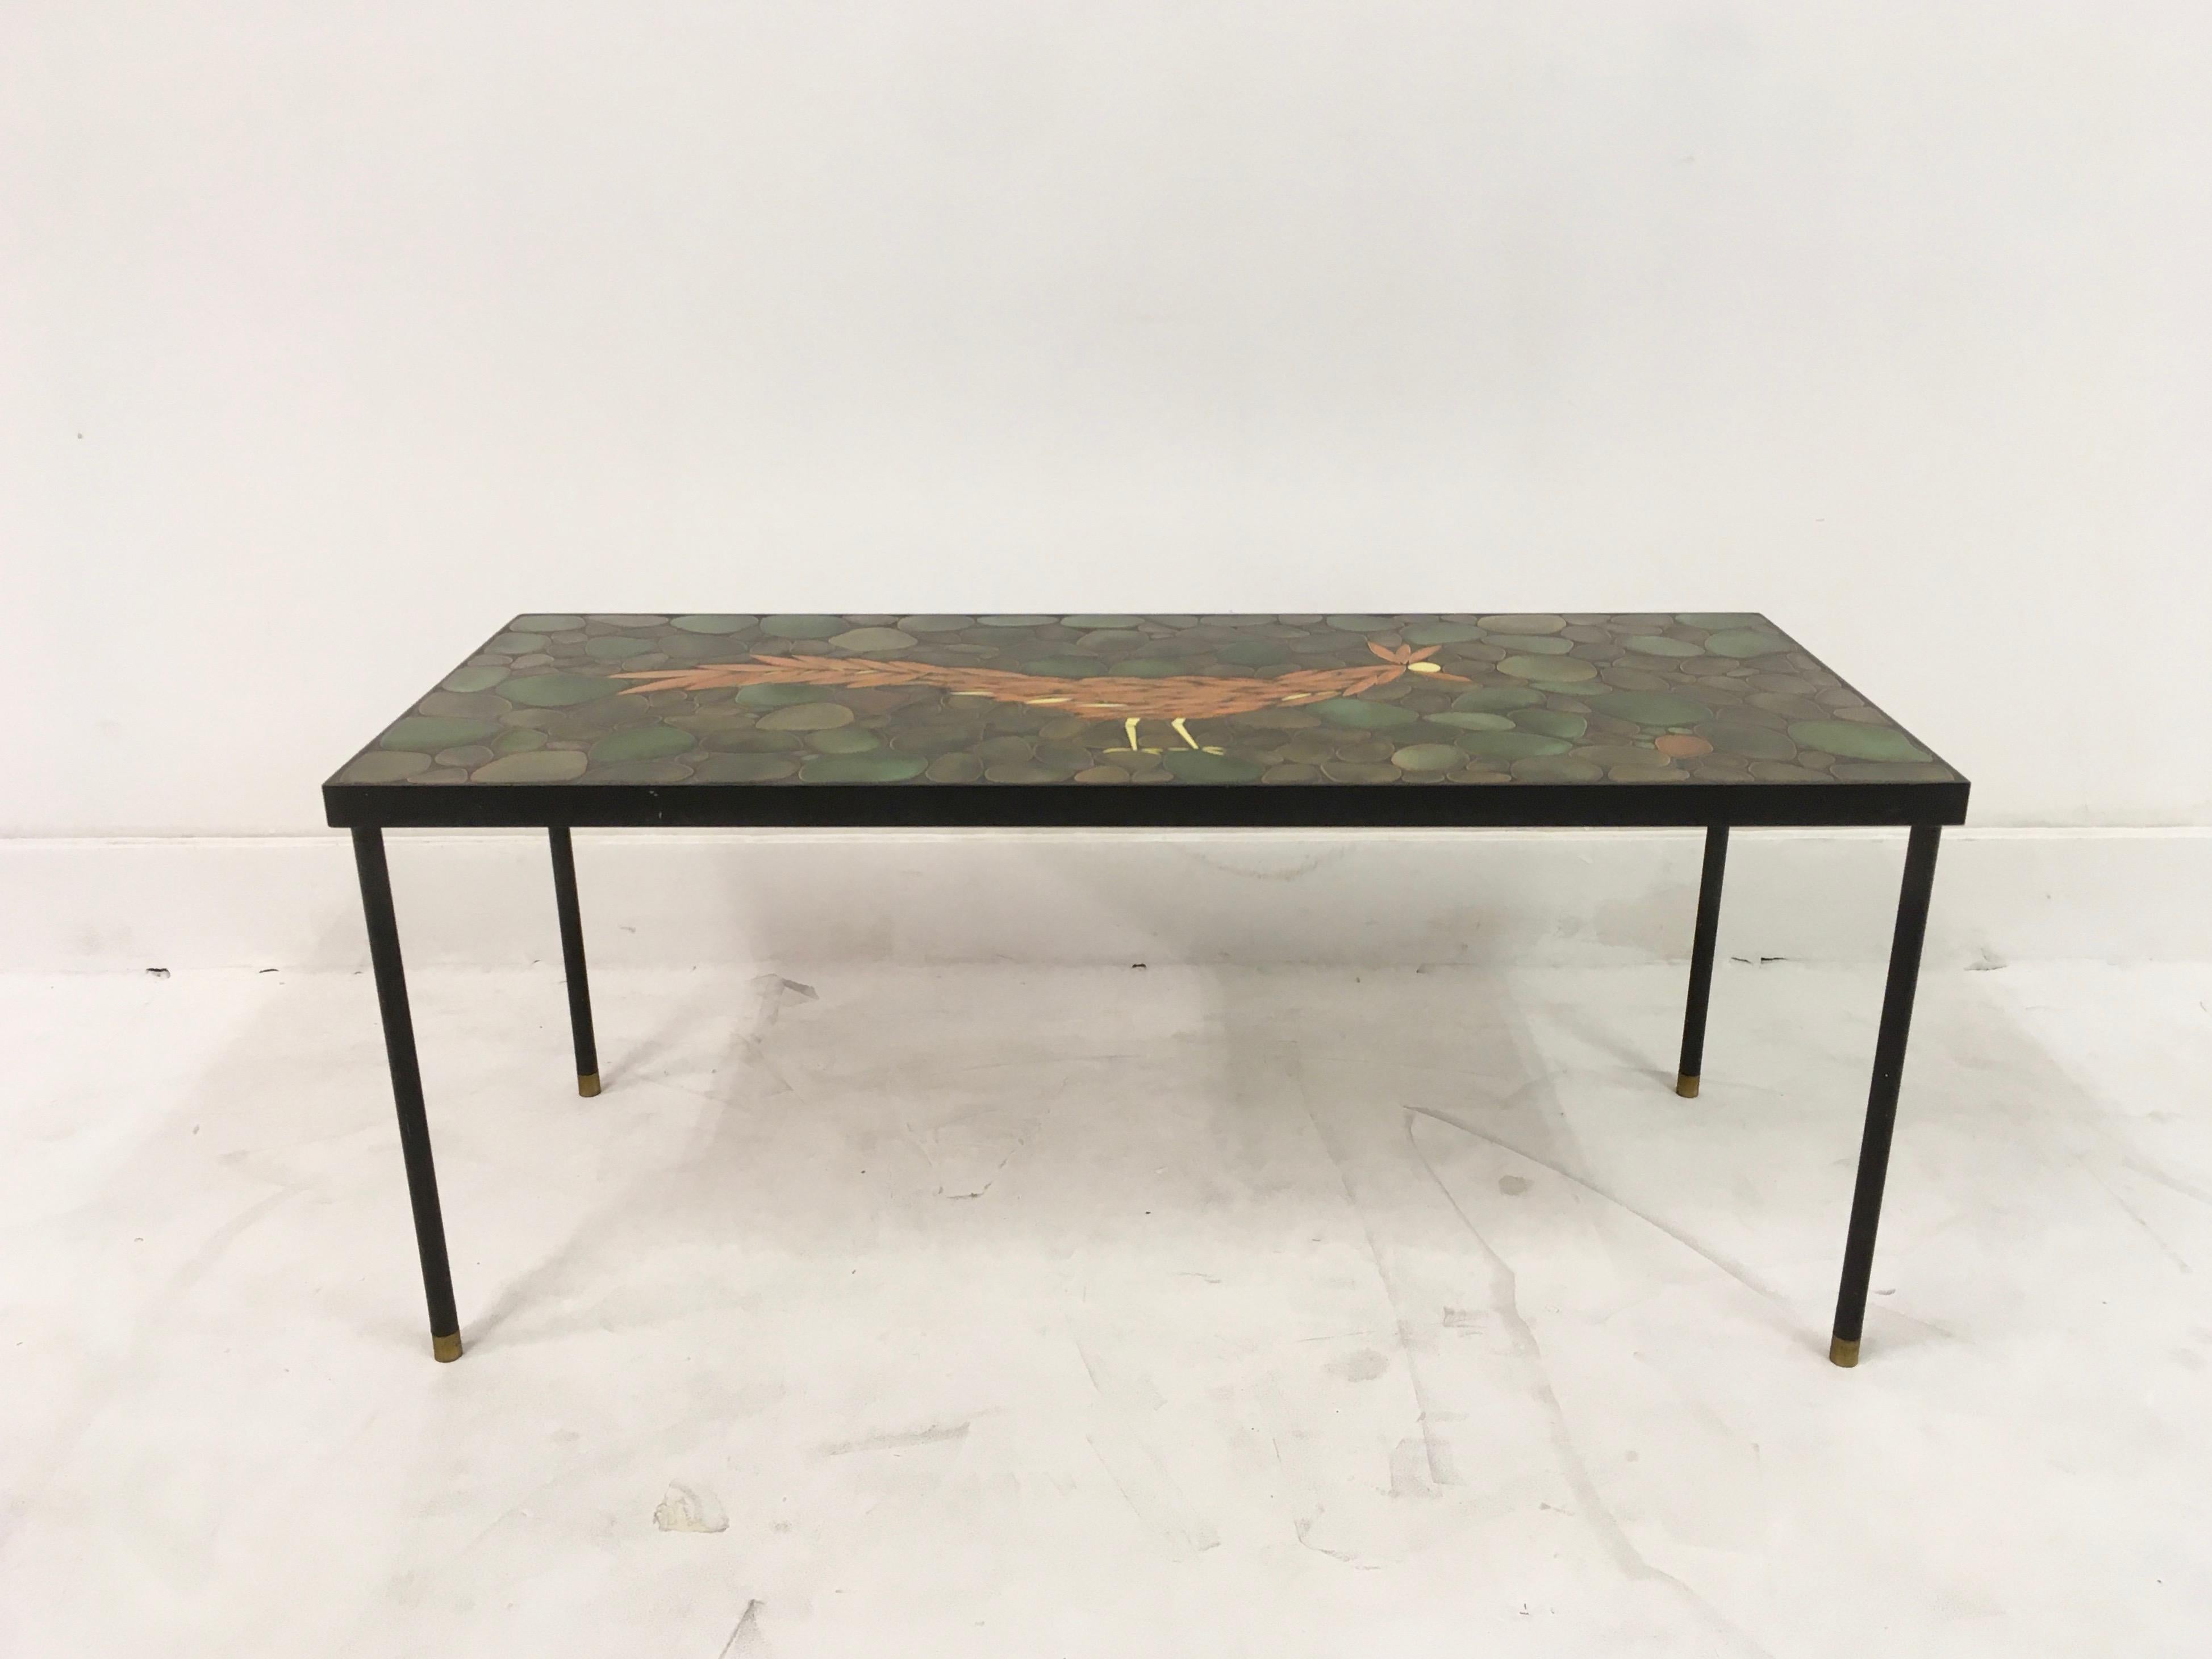 Vintage 1960s Ceramic, Steel and Brass Coffee Table In Good Condition For Sale In London, London